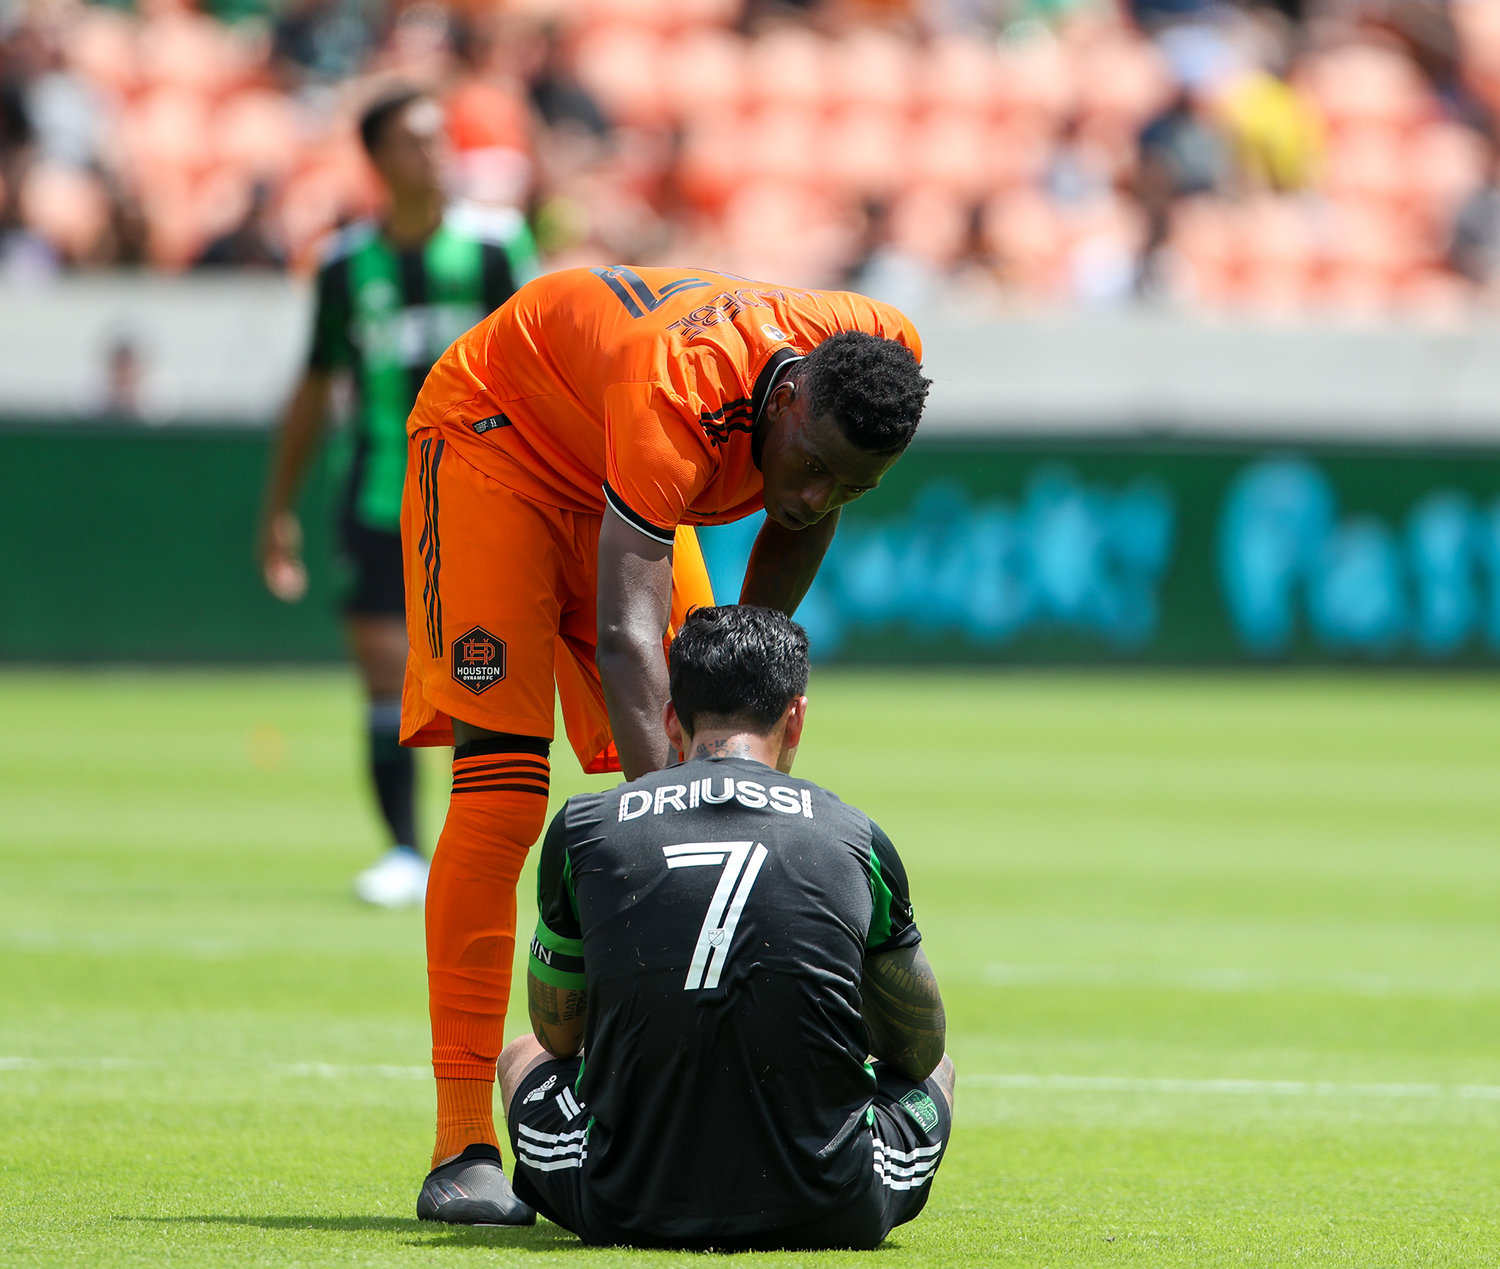 Houston Dynamo defender Teenage Hadebe (17) comes over to check on Austin FC forward Sebastián Driussi (7) during the second half of a Major League Soccer match on April 30, 2022 in Houston, Texas.